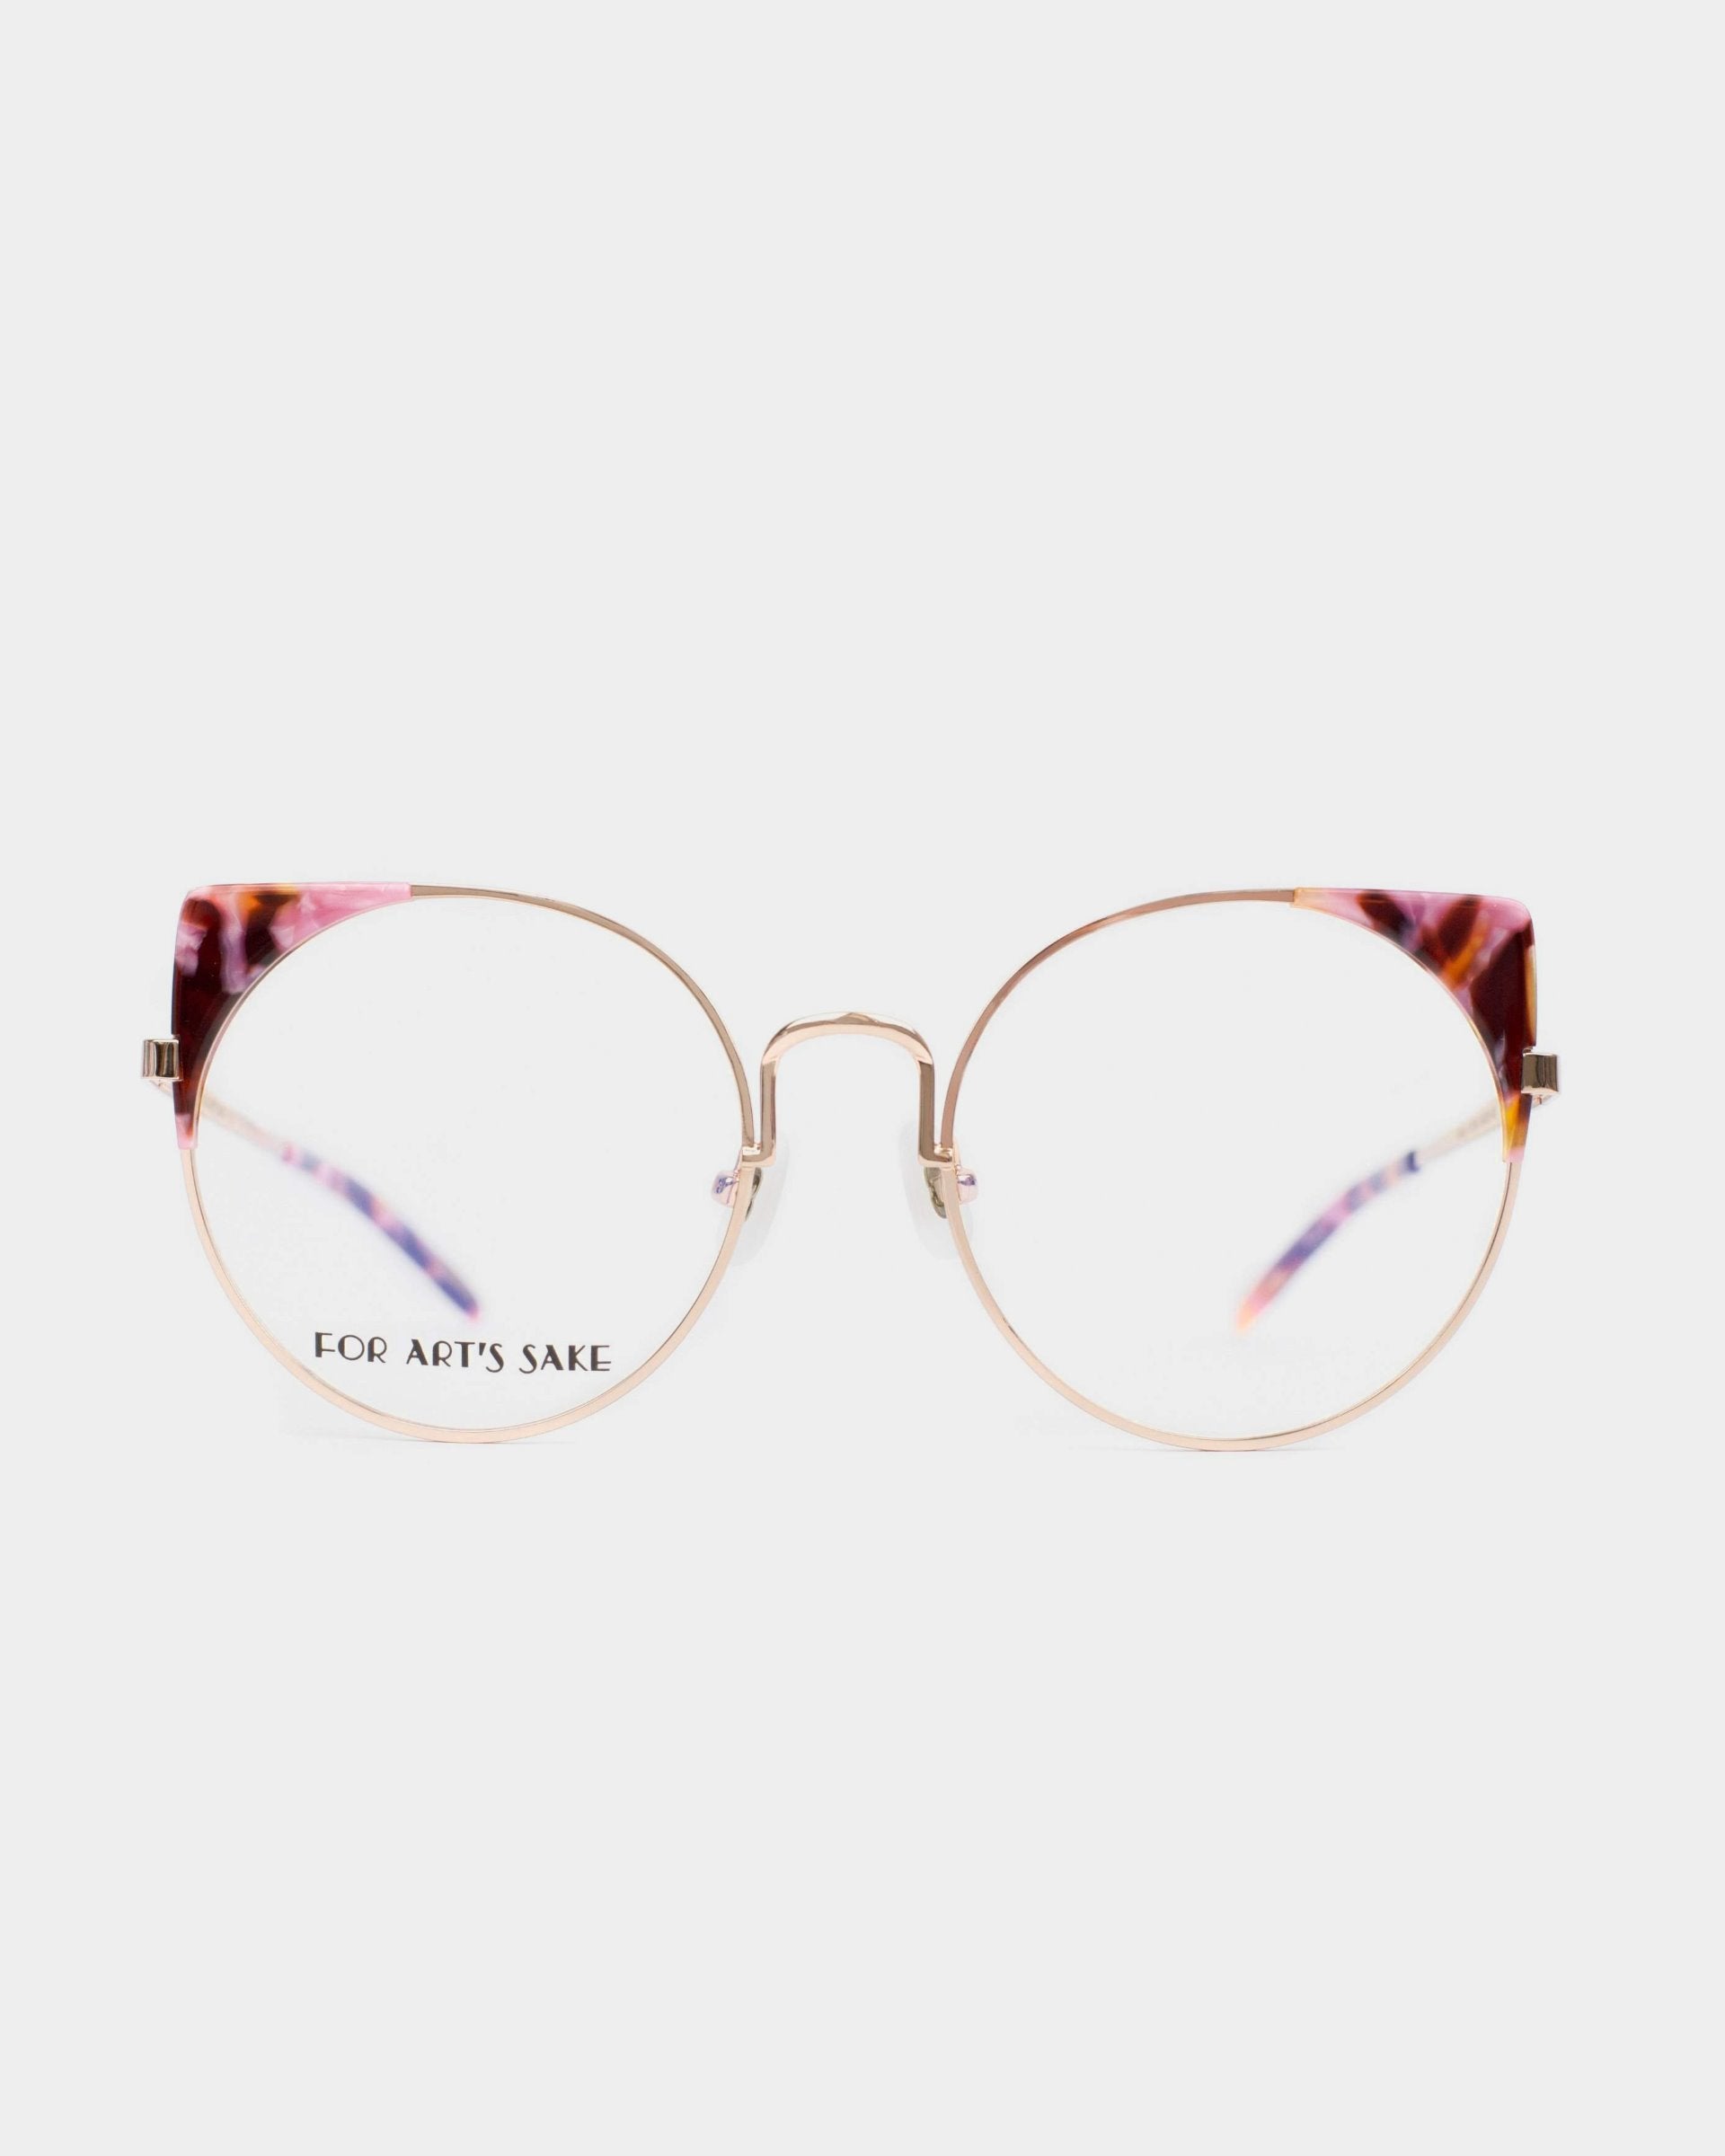 A pair of stylish Brisky eyeglasses with gold metal rims and round lenses. The top part of the frames features a pink and black marbled pattern, and the brand name &quot;For Art&#39;s Sake®&quot; is visible on the left lens. These glasses come with a blue light filter for extra eye protection.